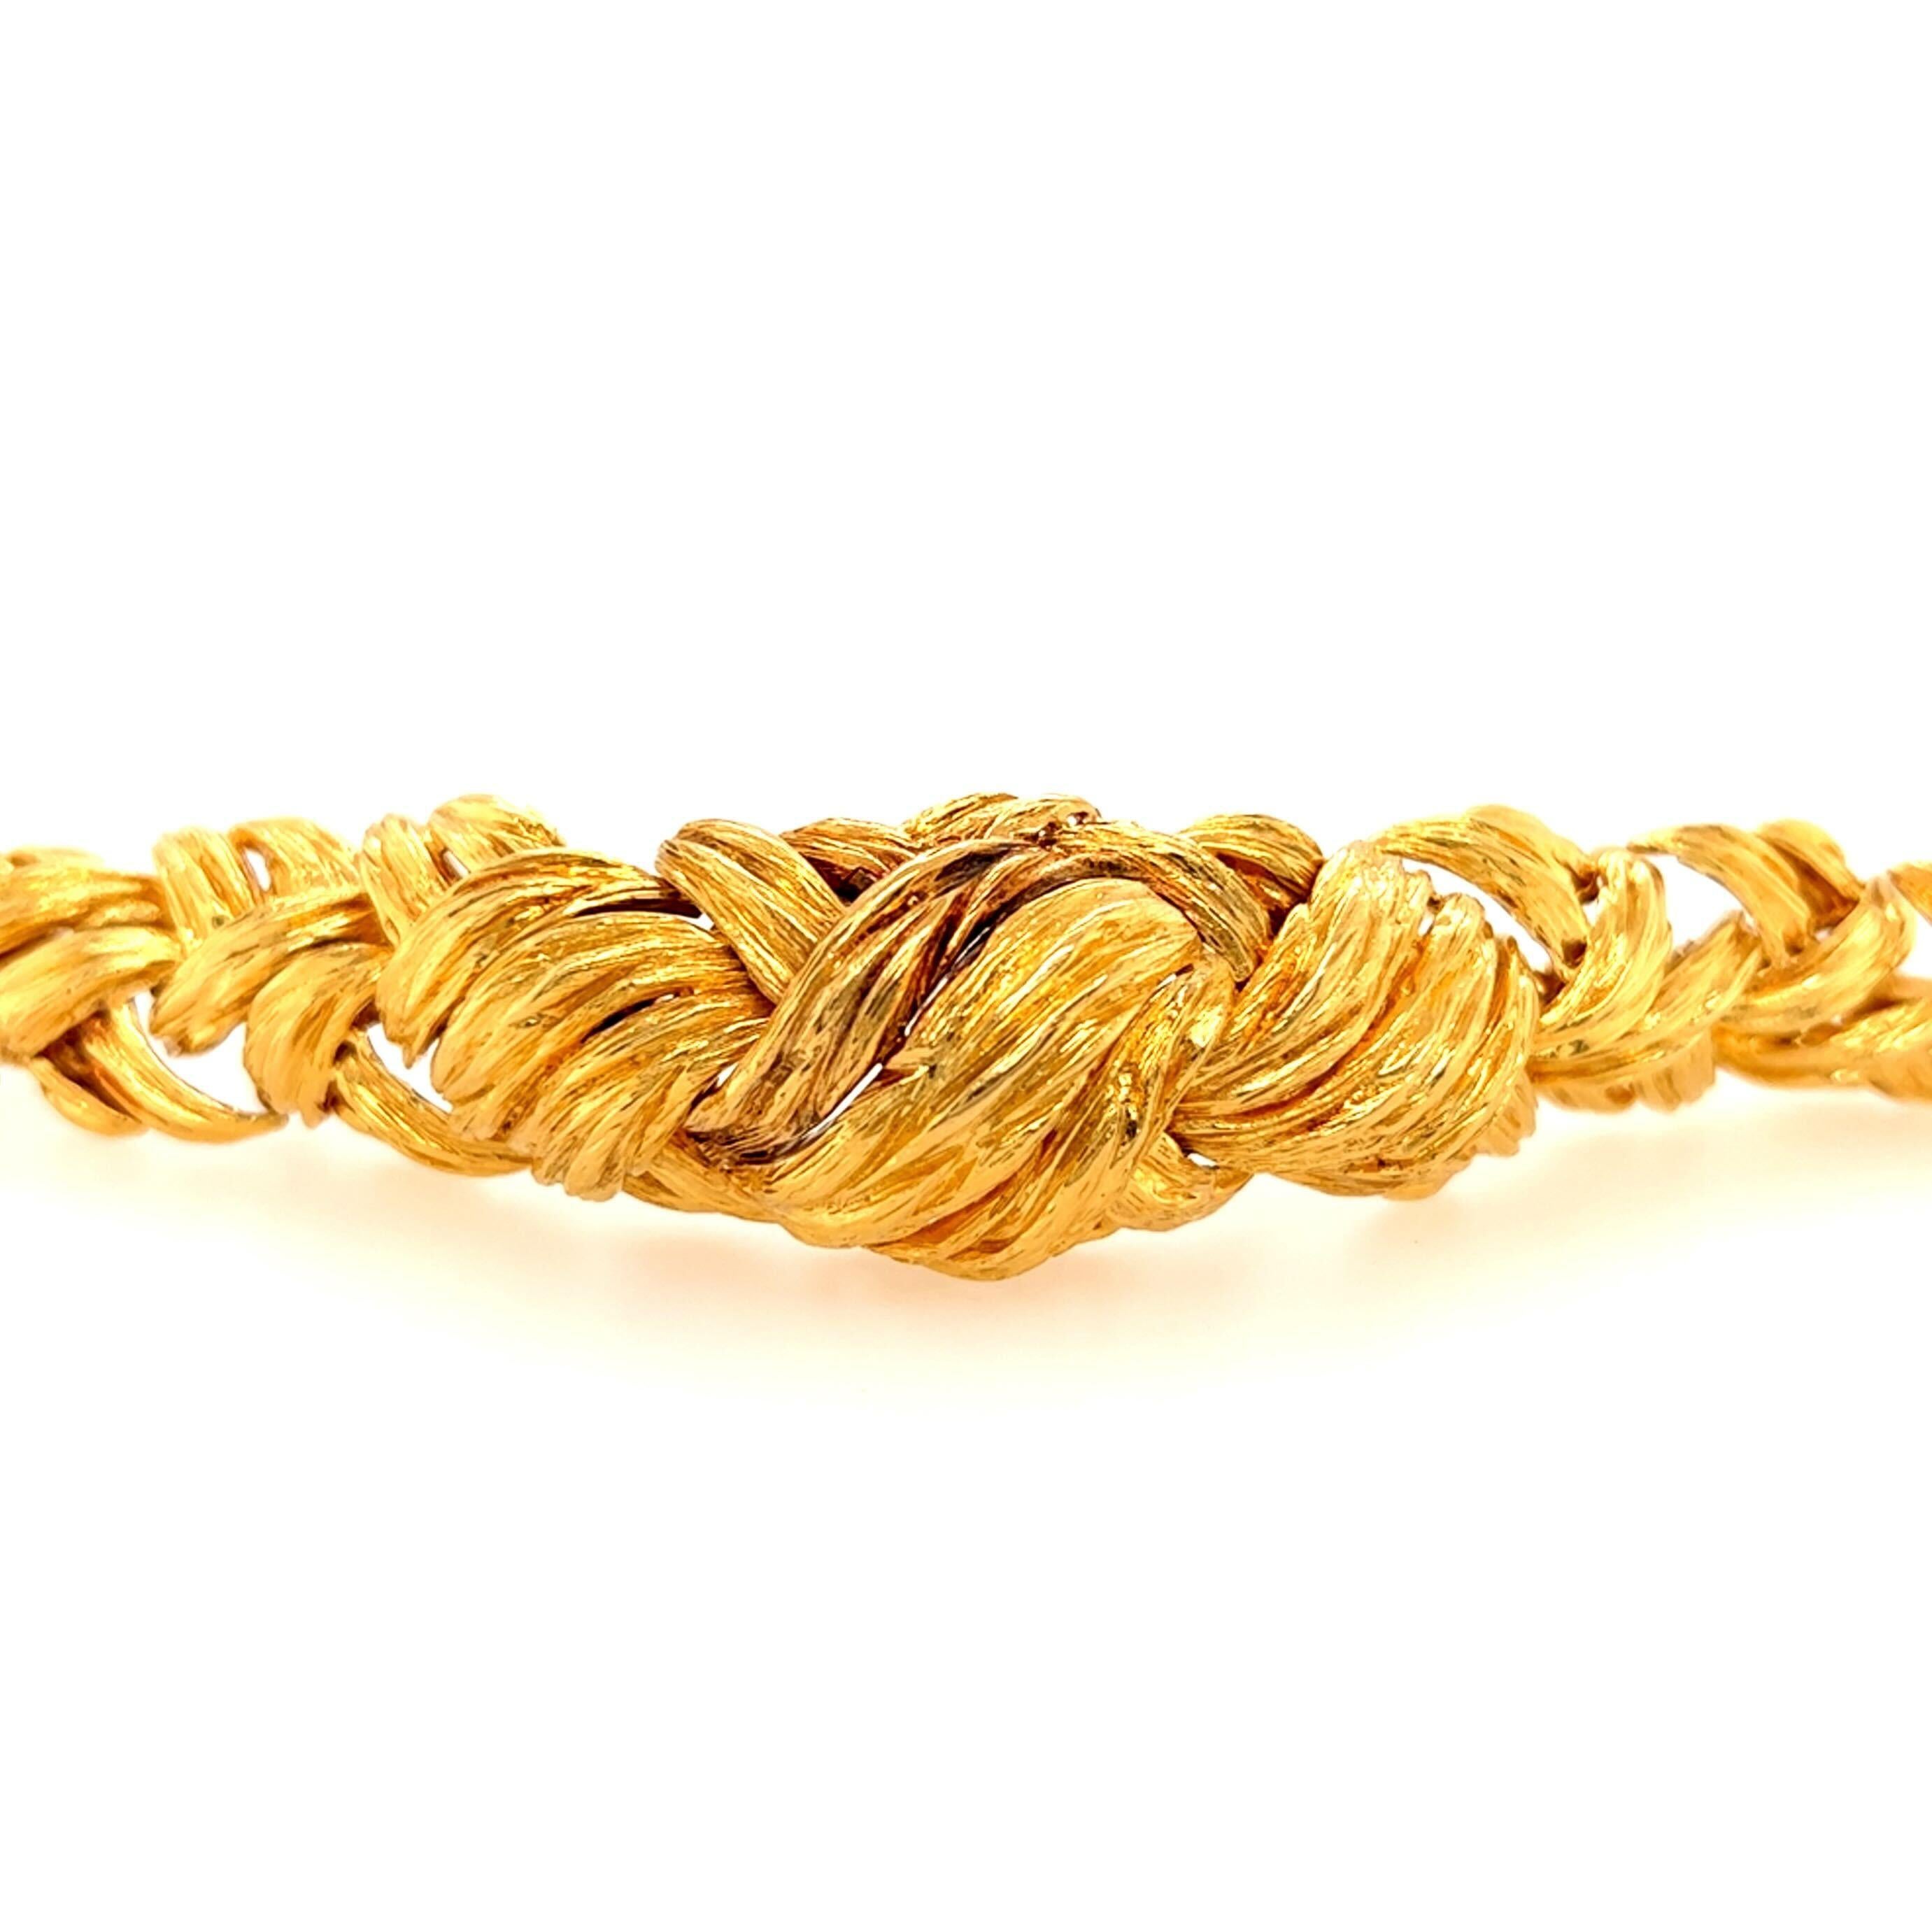 An 18 karat yellow gold bracelet, David Webb.  Designed as a graduated stylized braid of textured gold.  Length approximately 6 inches.  Gross weight approximately 9.40 grams.  Signed Webb.